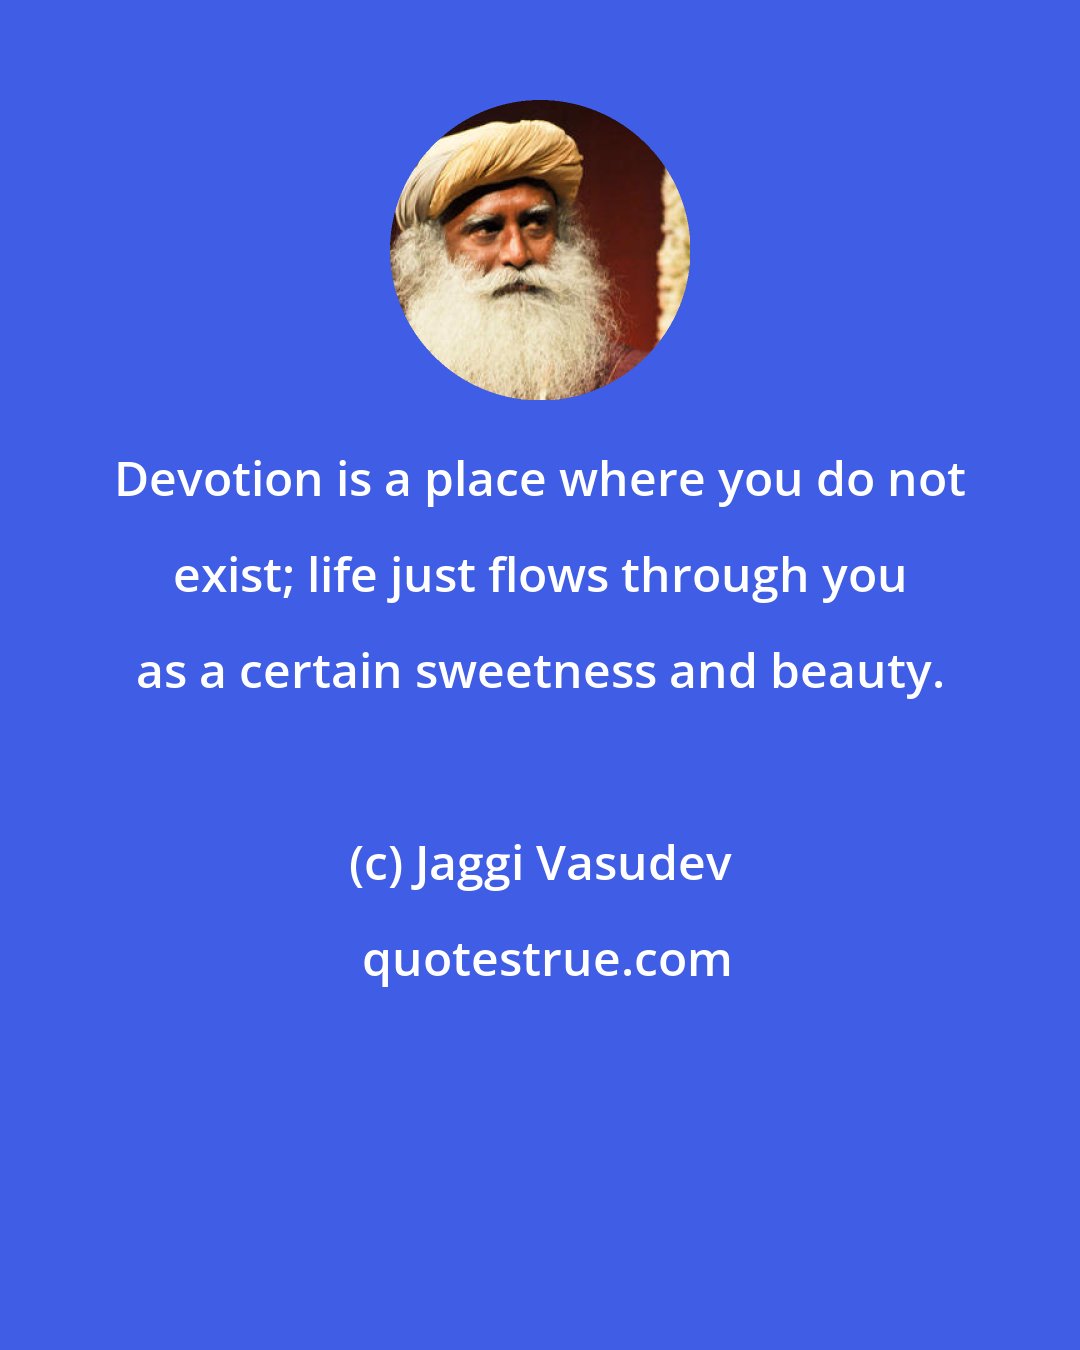 Jaggi Vasudev: Devotion is a place where you do not exist; life just flows through you as a certain sweetness and beauty.